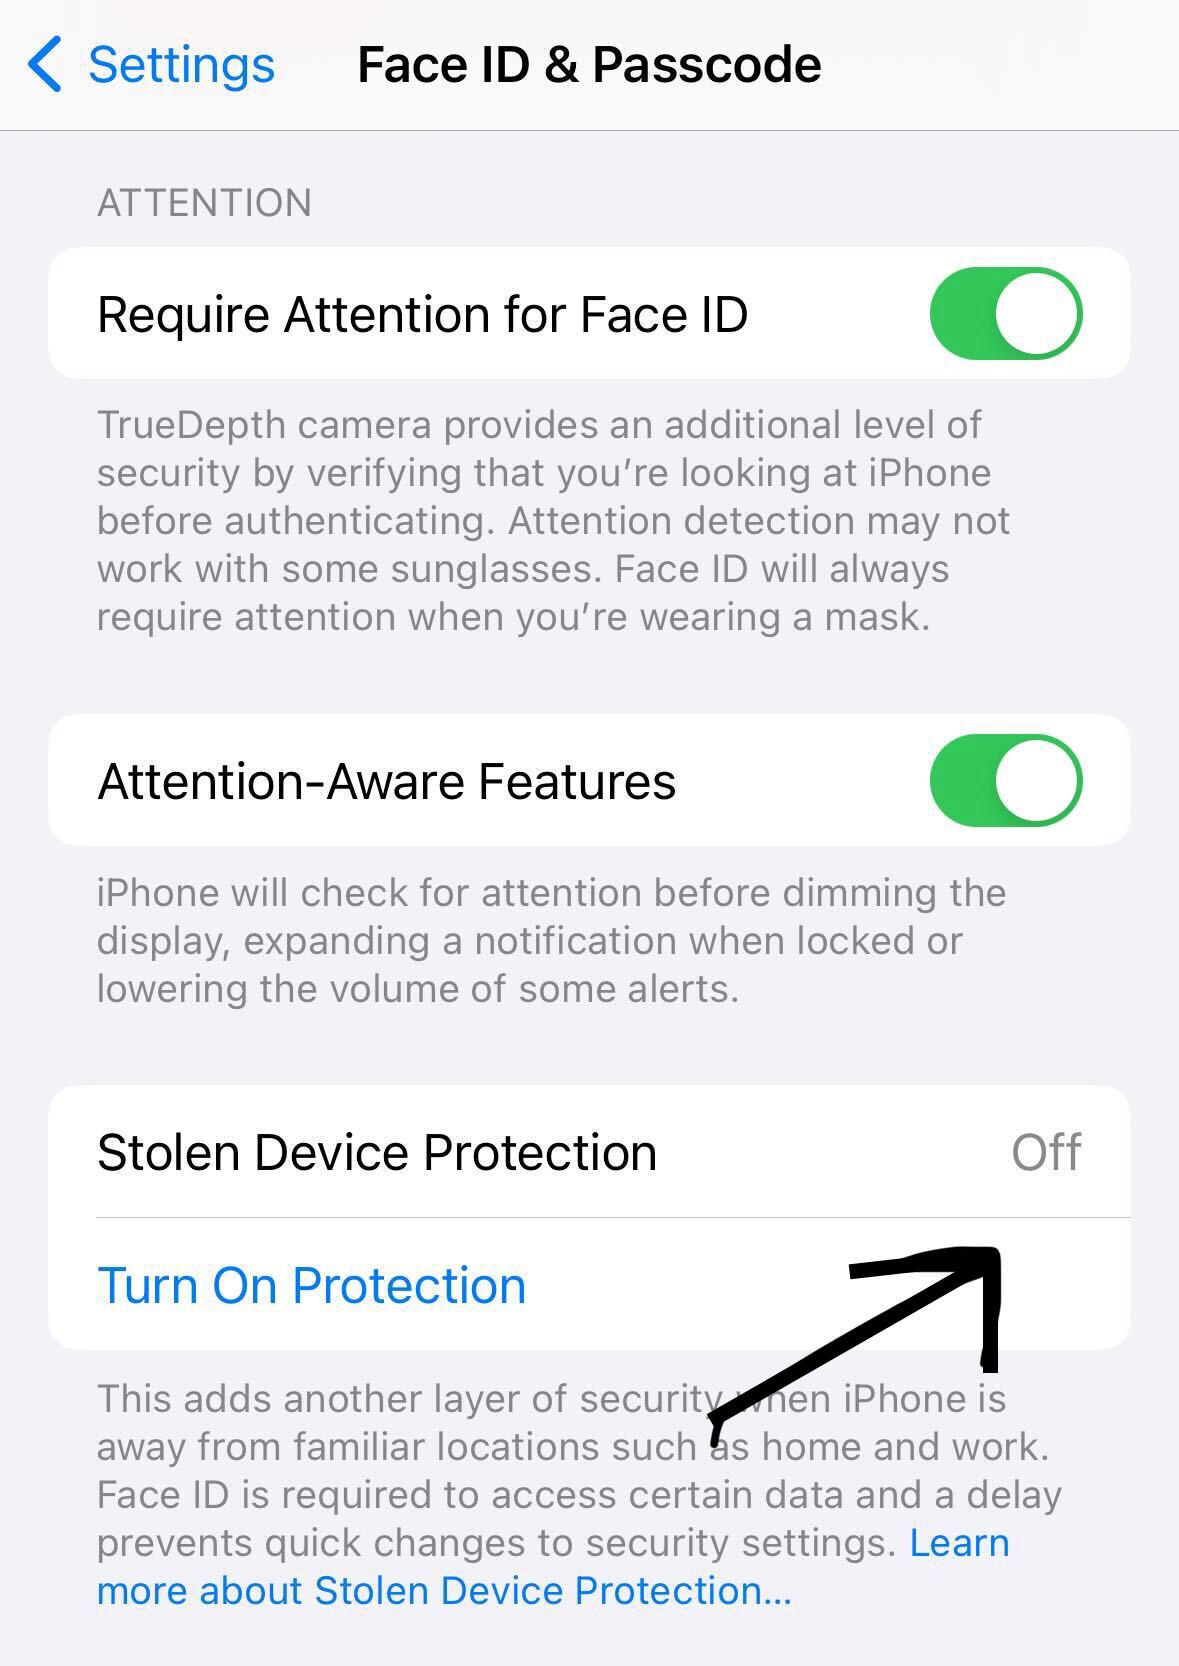 Screenshot of stolen device protection feature on iPhone